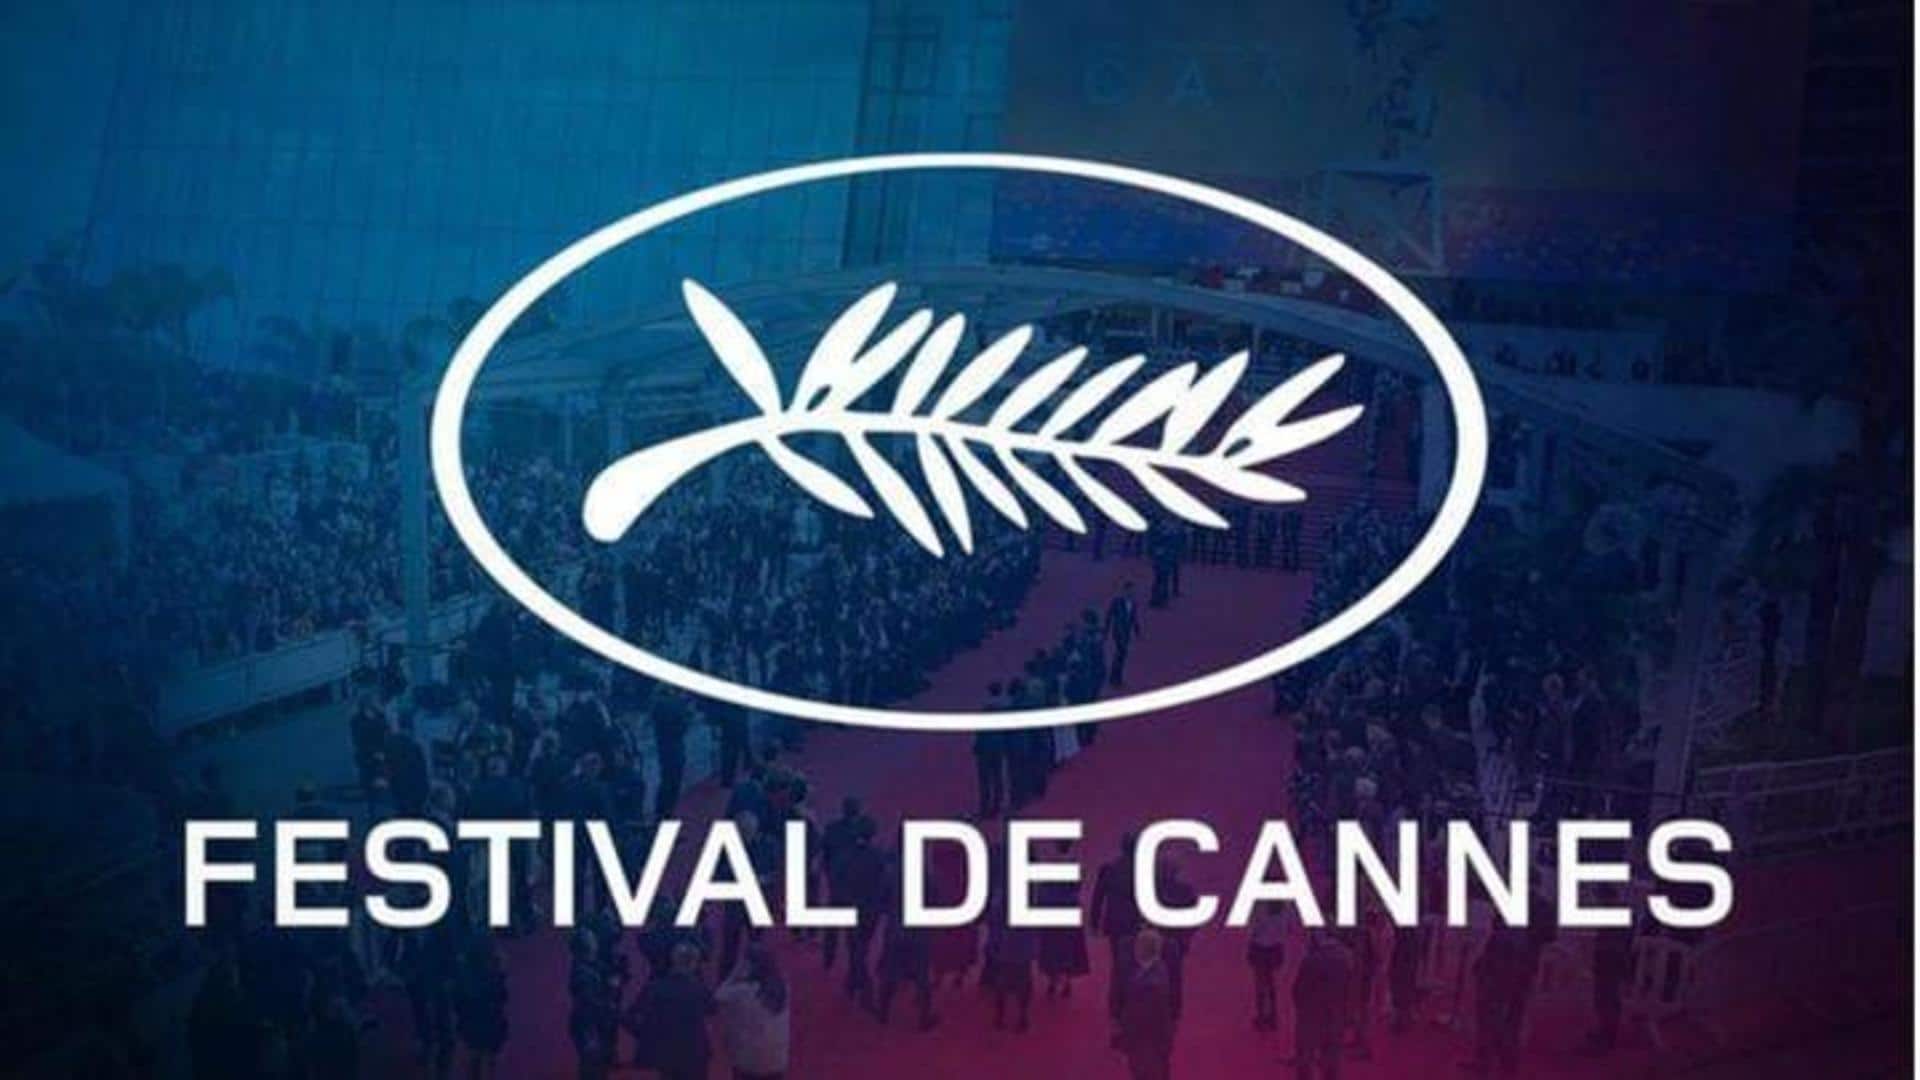 Cannes 2023: Why is the film festival held in Cannes